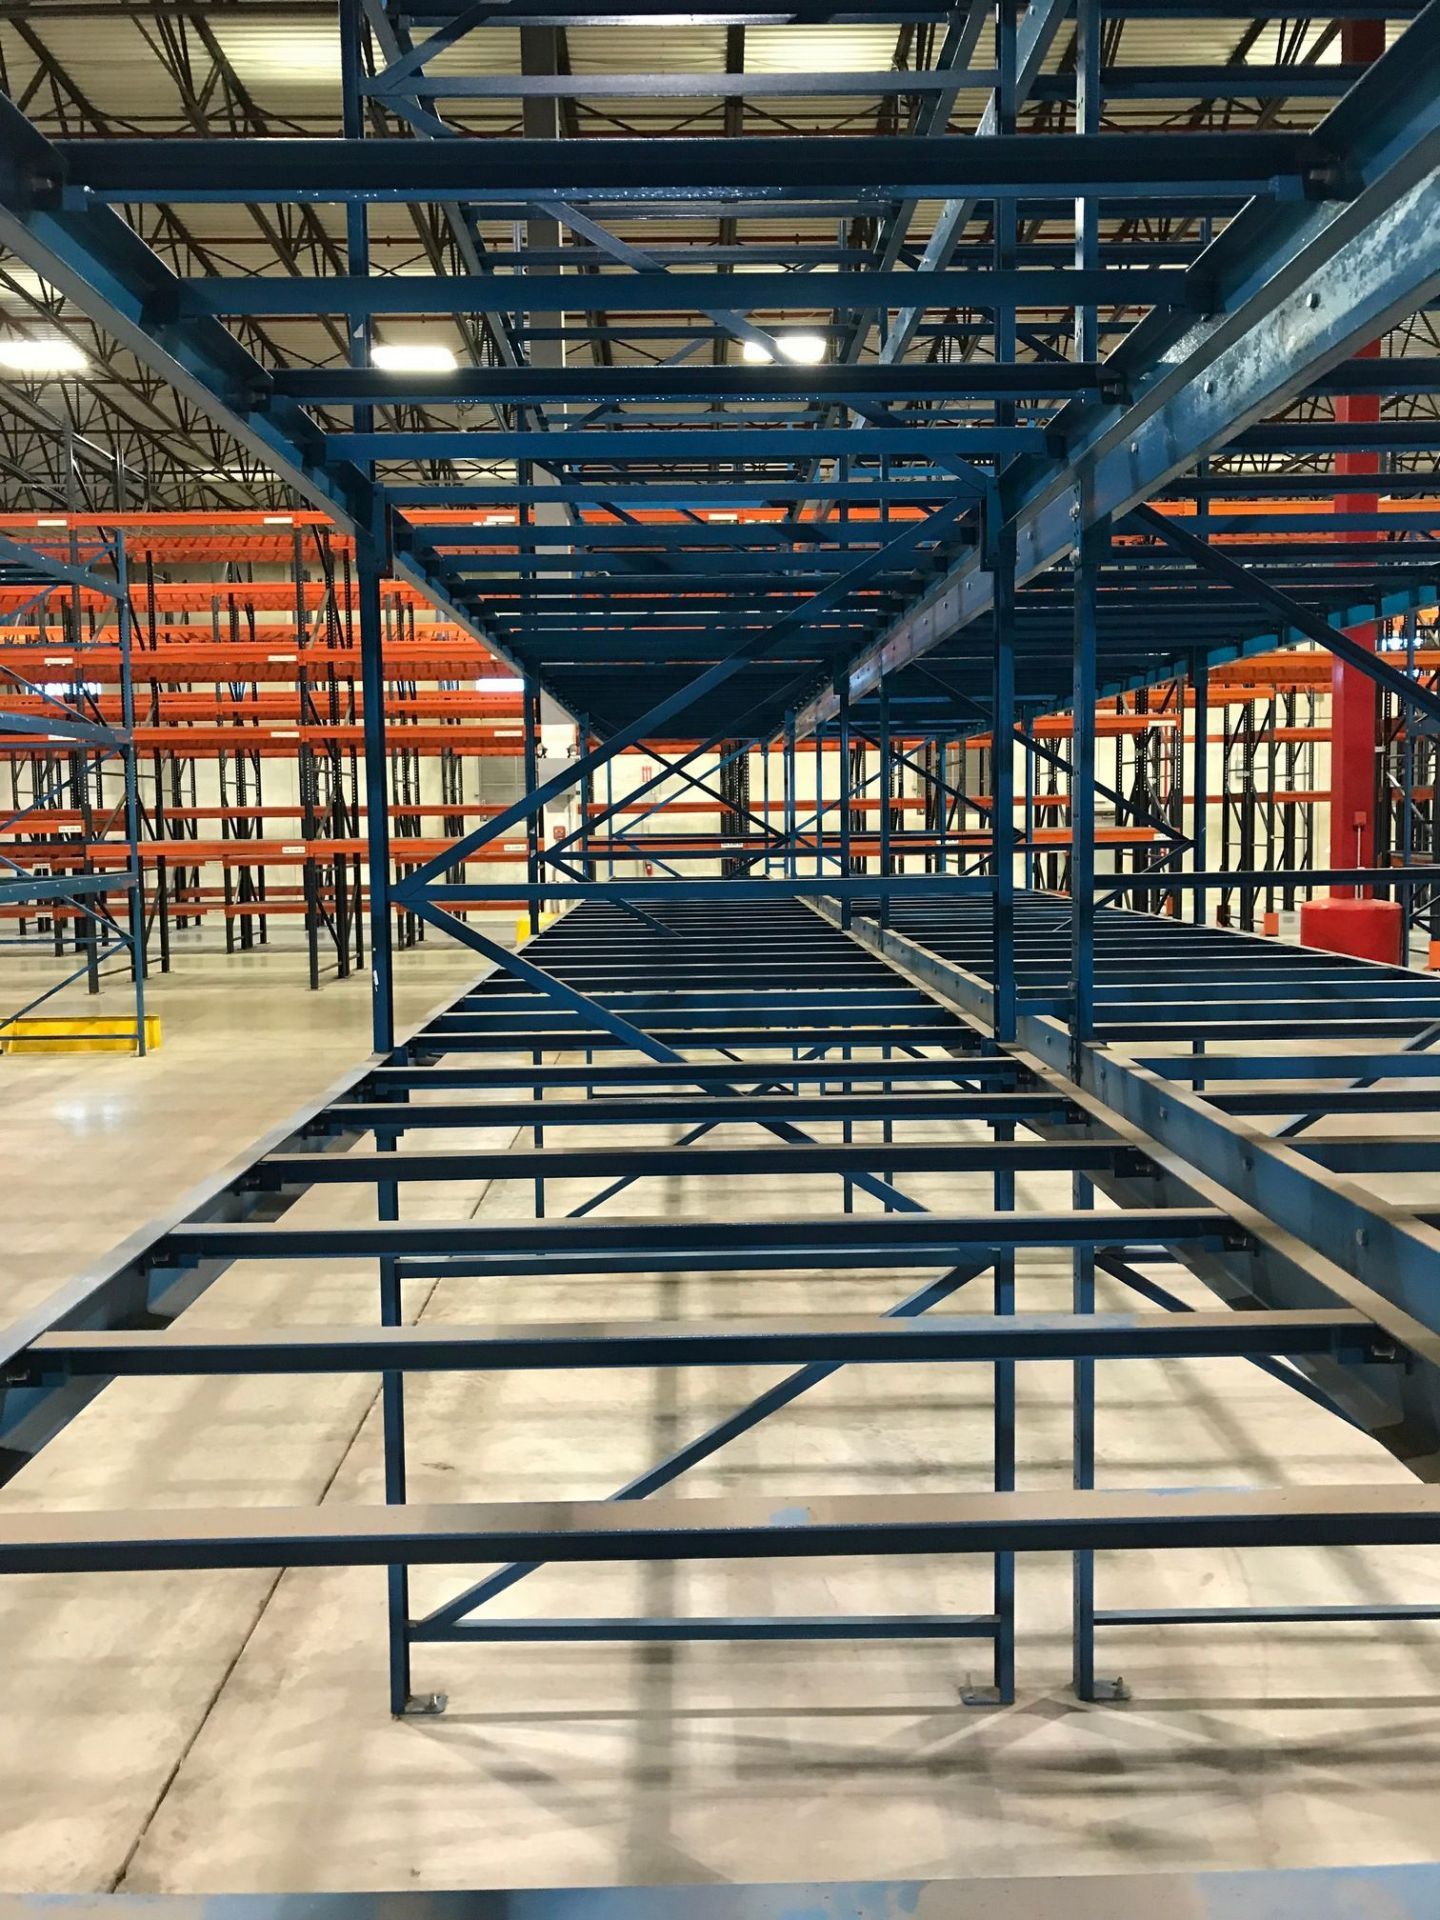 SECTIONS 144" X 60" X 192" BOLT TOGETHER TYPE ADJUSTABLE BEAM PALLET RACK WITH SHELF SUPPORTS ** - Image 4 of 4